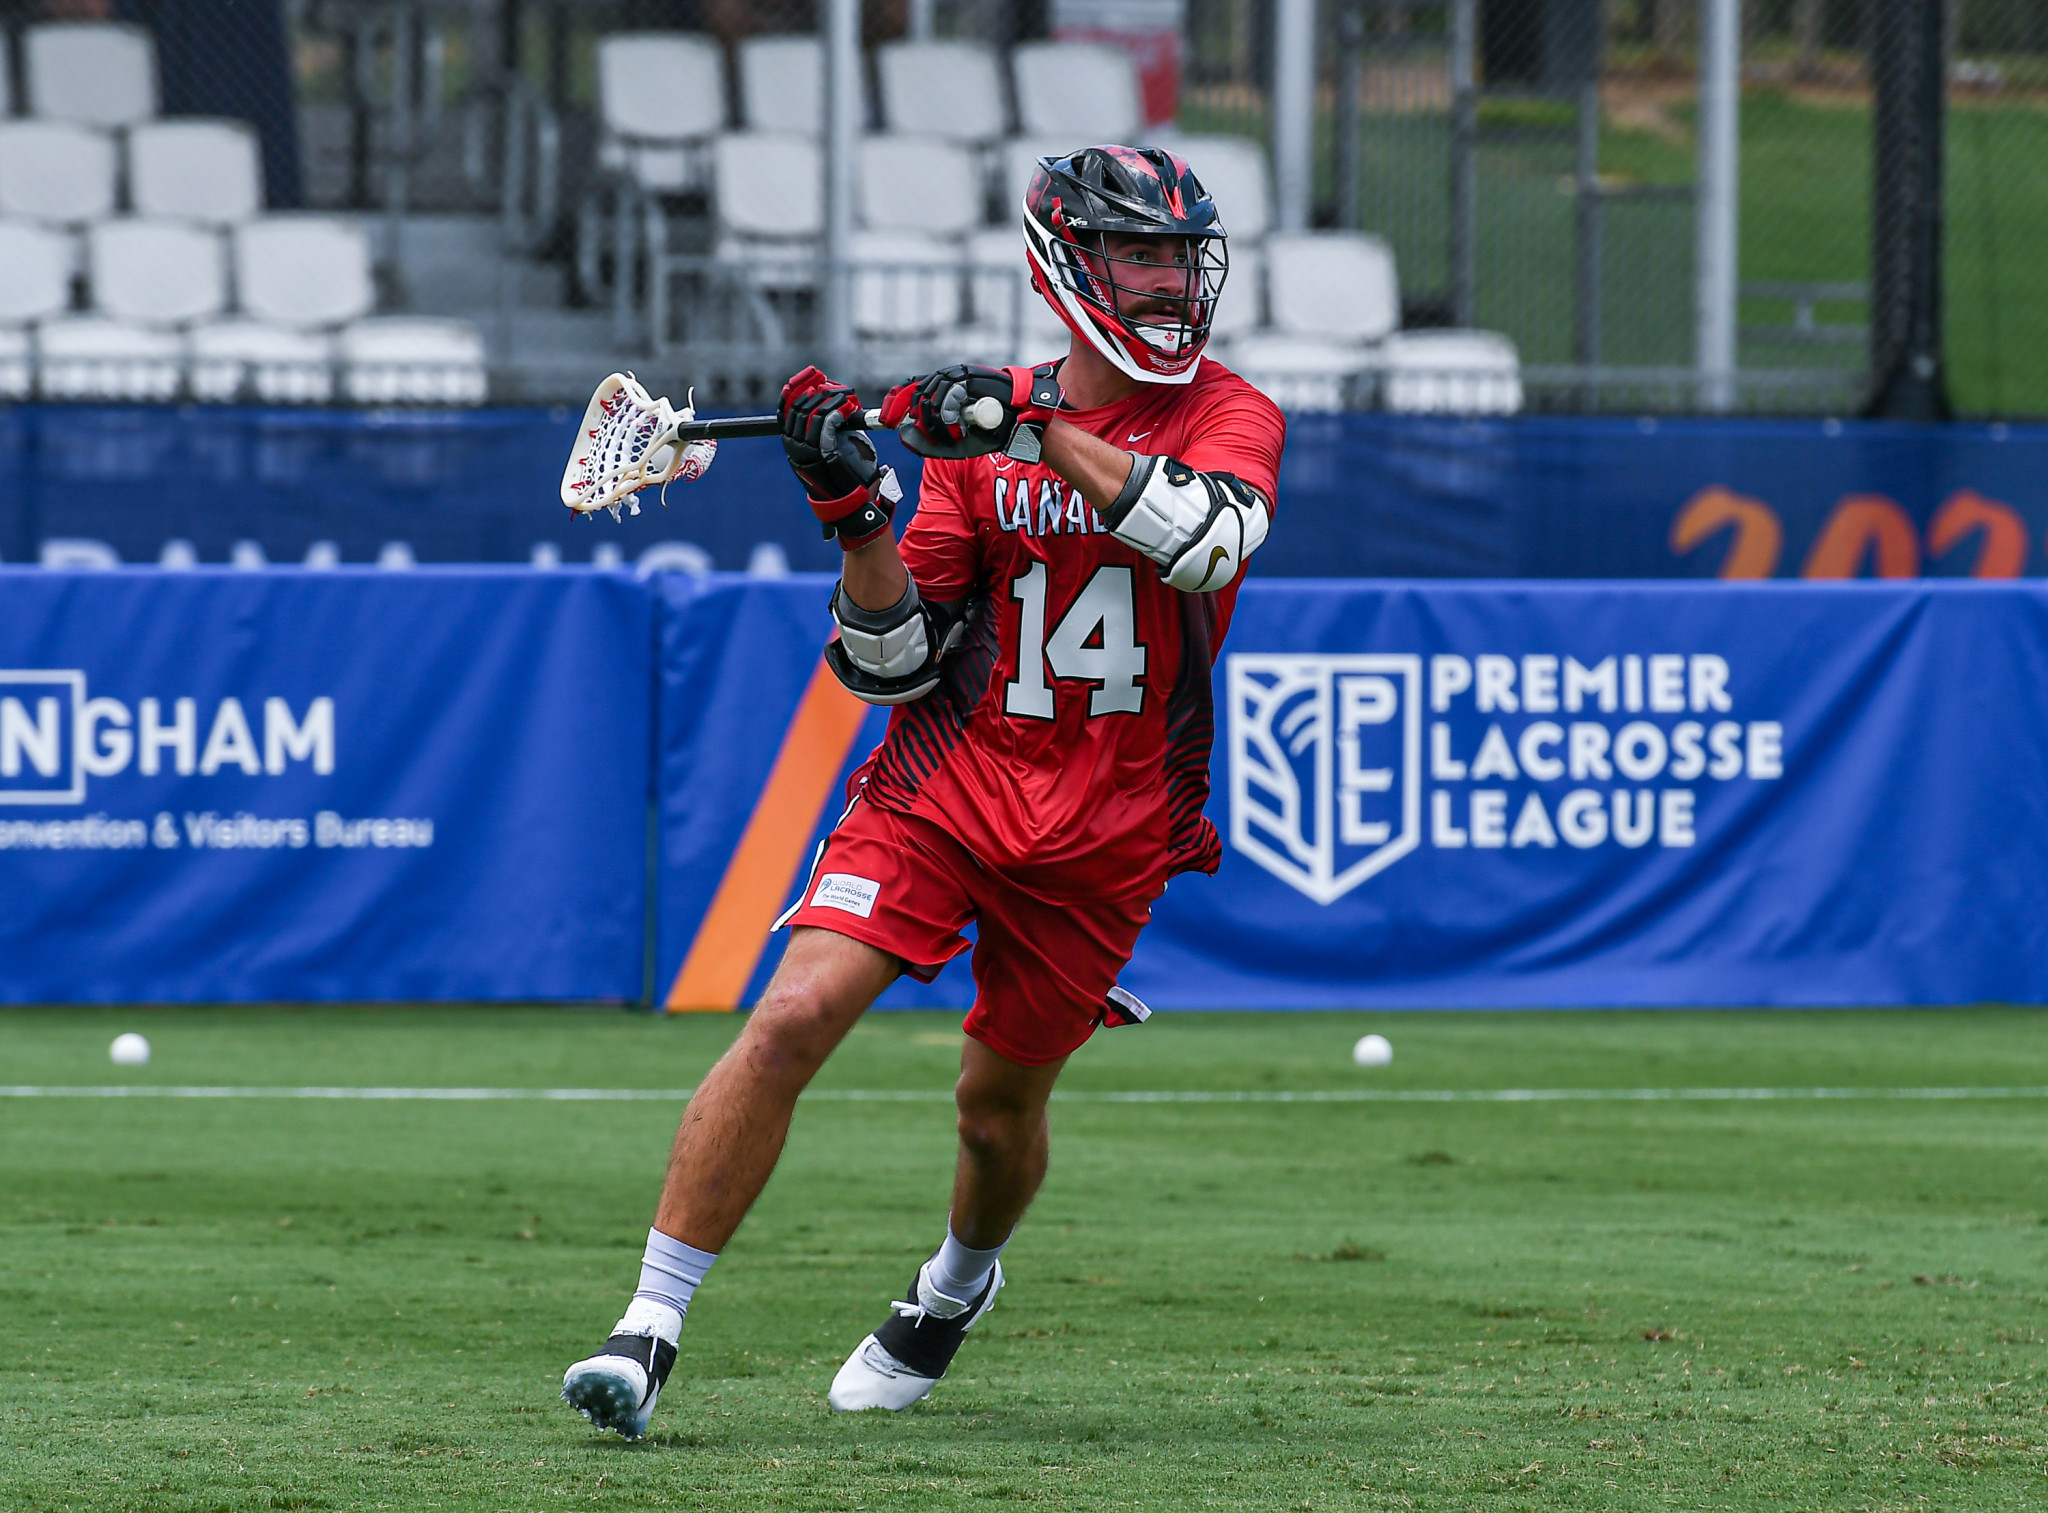 Canada beat the United States 23-9 to win men's lacrosse gold in Birmingham ©The World Games 2022